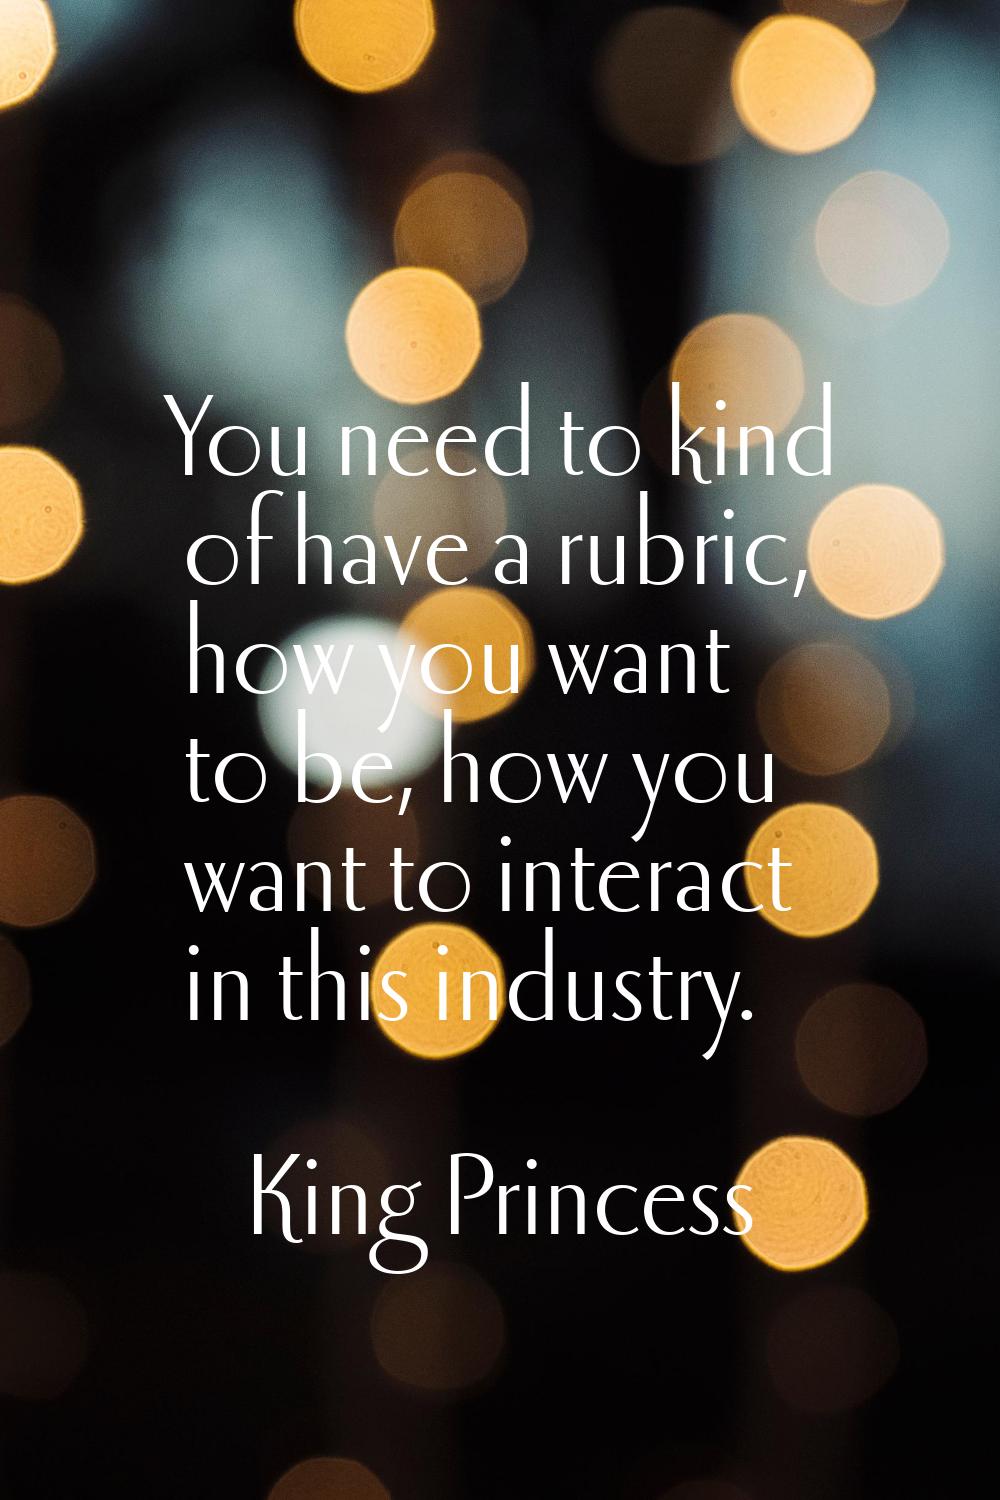 You need to kind of have a rubric, how you want to be, how you want to interact in this industry.